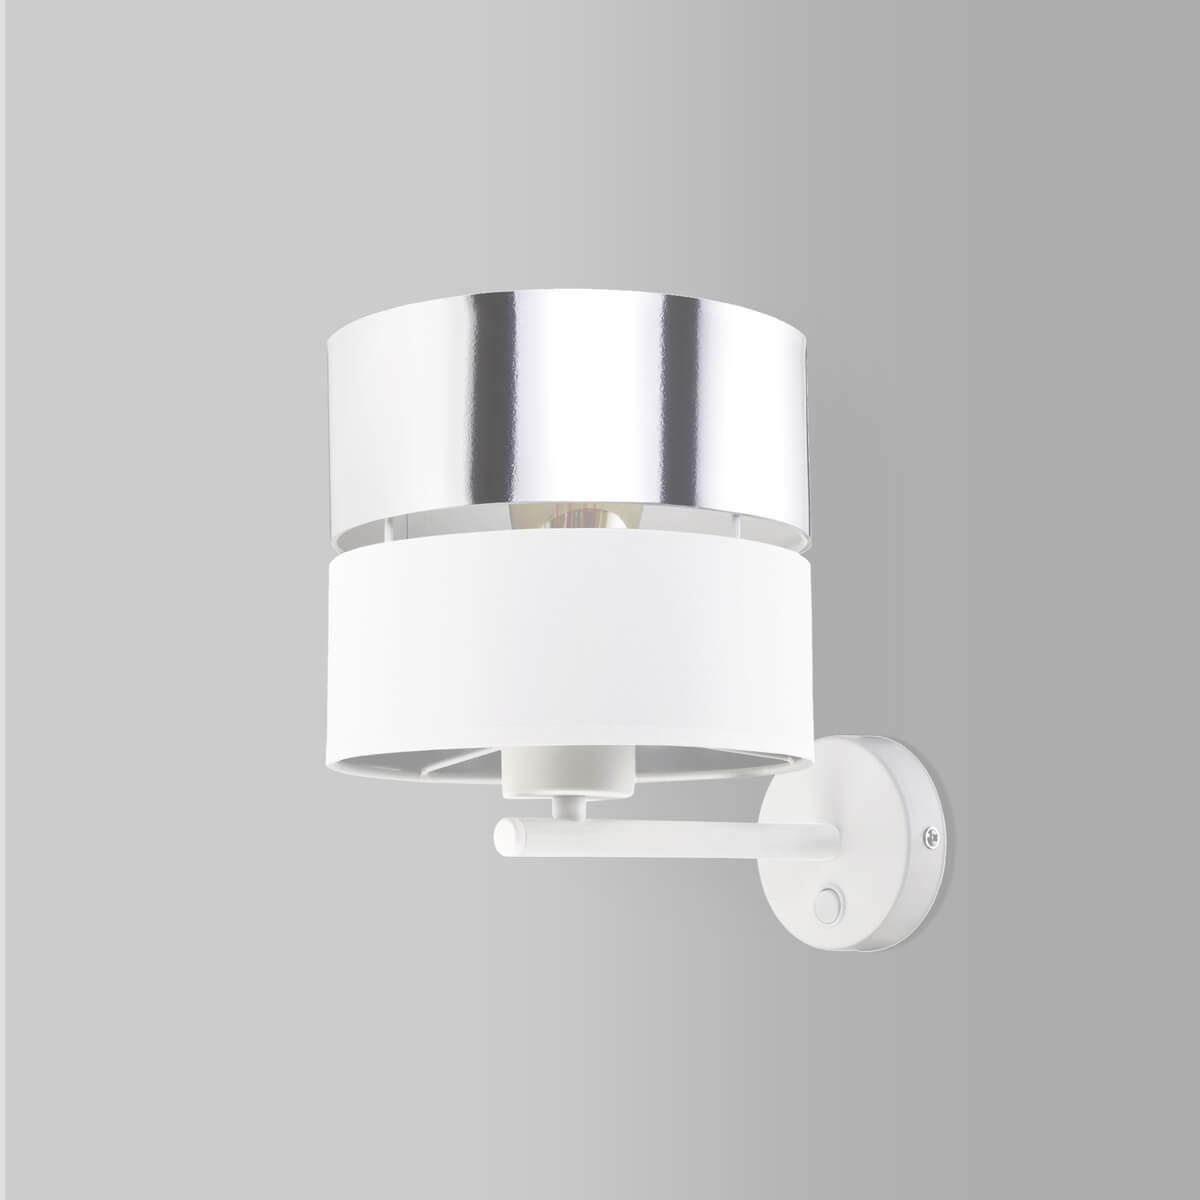 Бра TK Lighting 4175 Hilton Silver level 42 the silver collection 1 cd